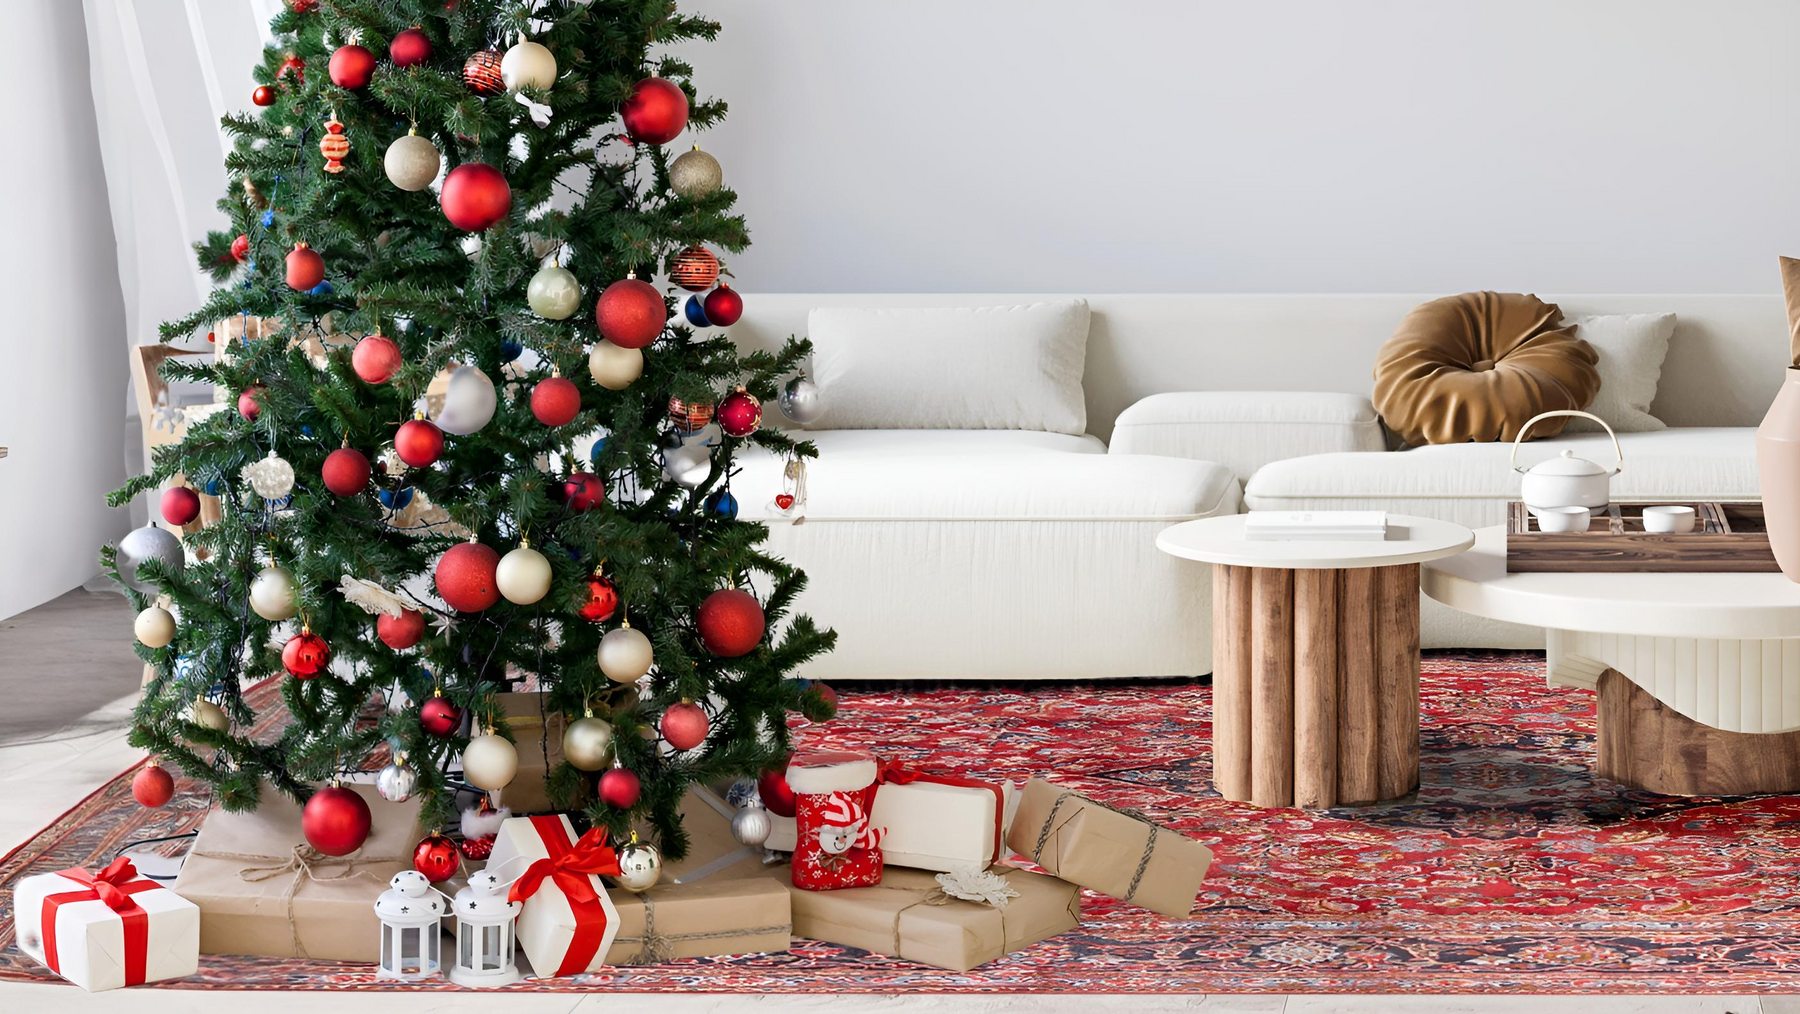 Vintage Vibes: Incorporating Antique Rugs into Modern Holiday Decor